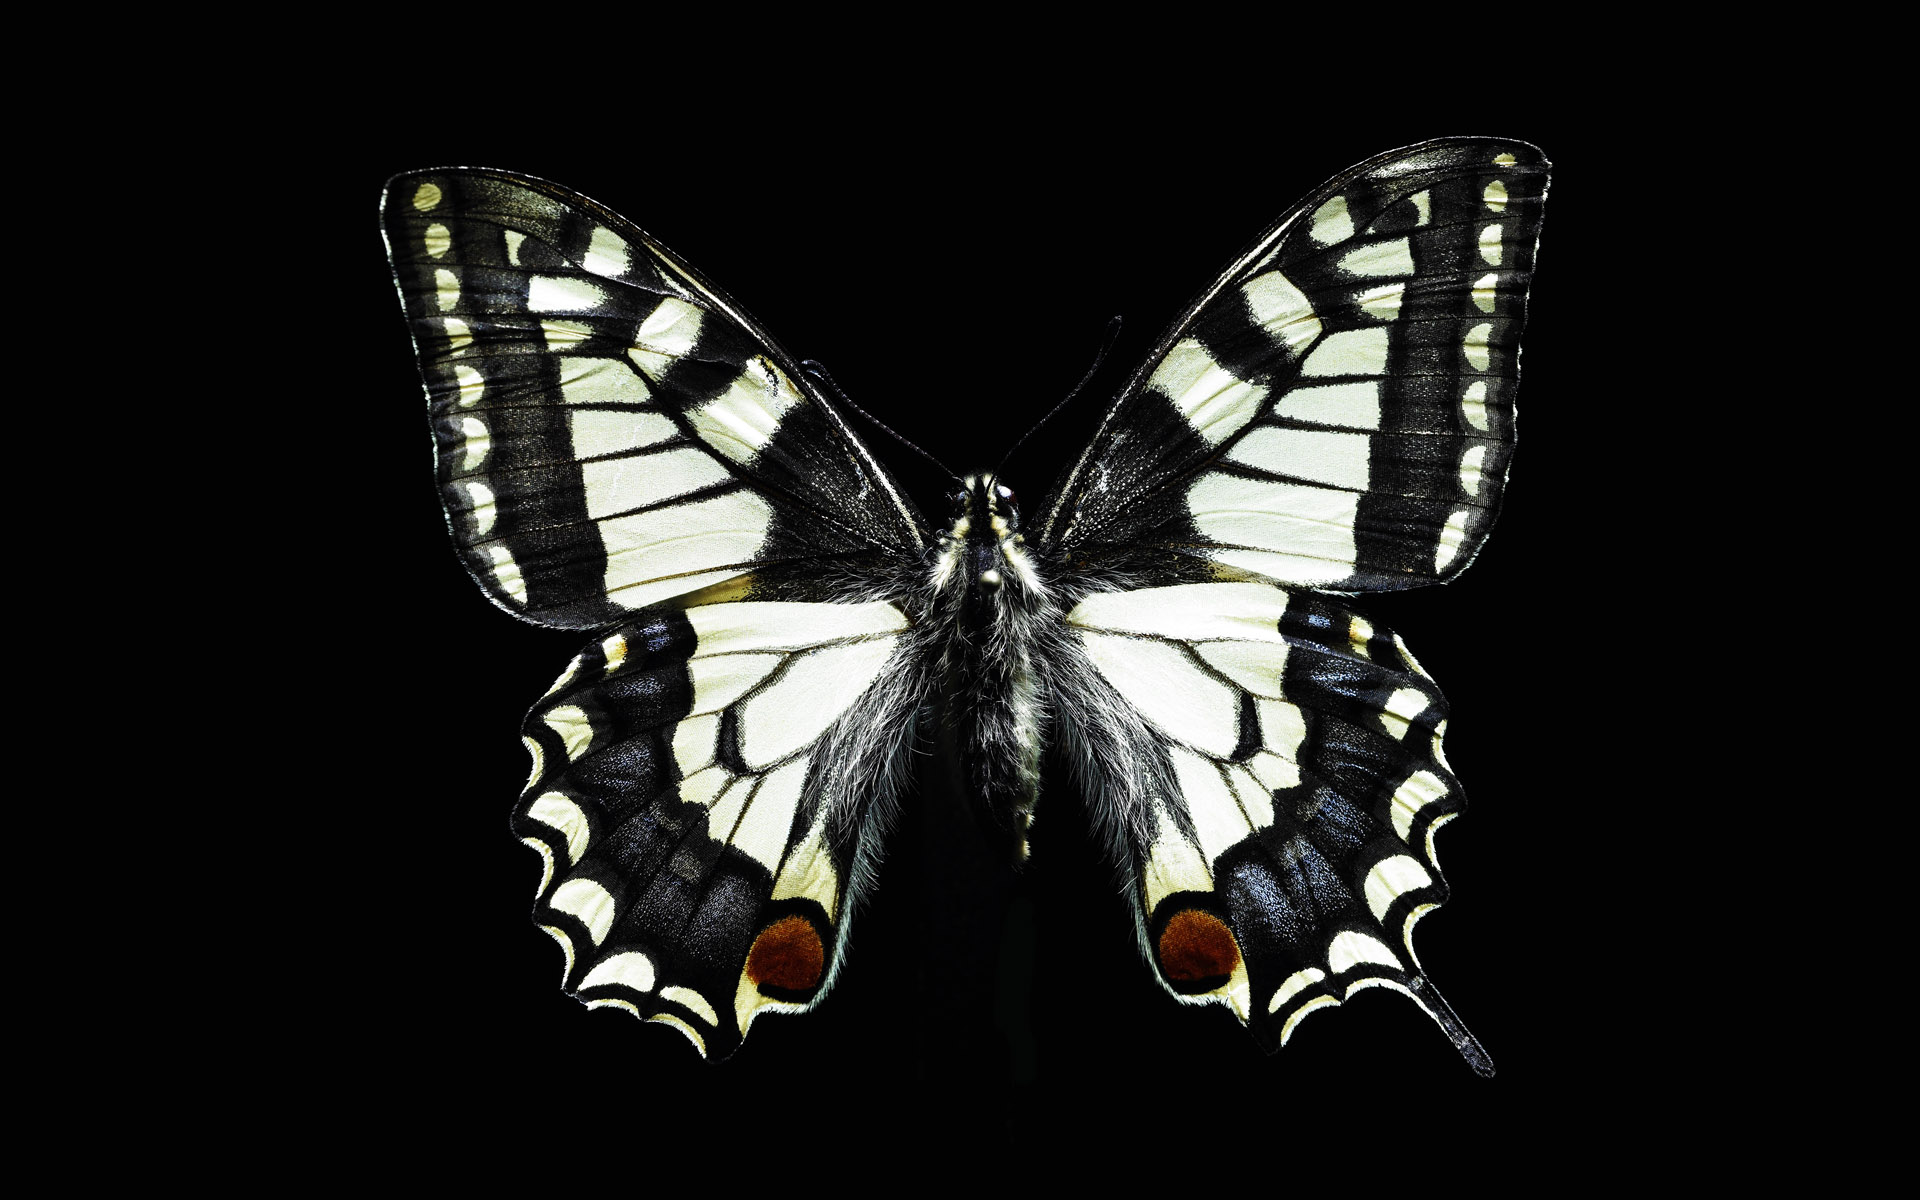 Black and white butterfly wallpapers and images - wallpapers ...